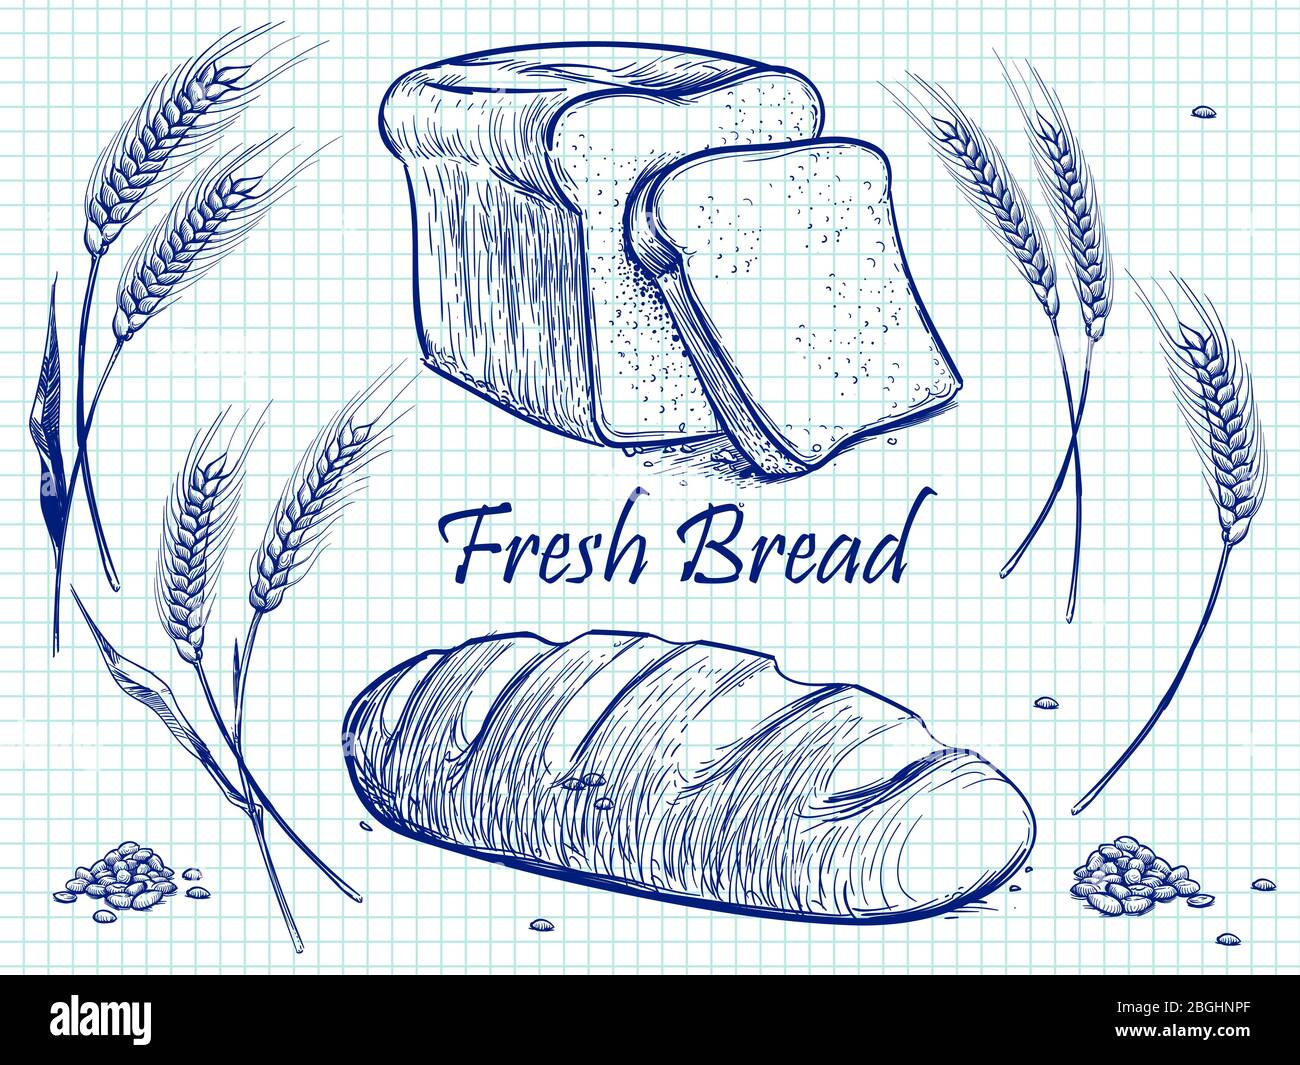 Sketch bunch of wheat ears, bread and grains. Vector bakery illustration on notebook page. Food organic from harvest Stock Vector